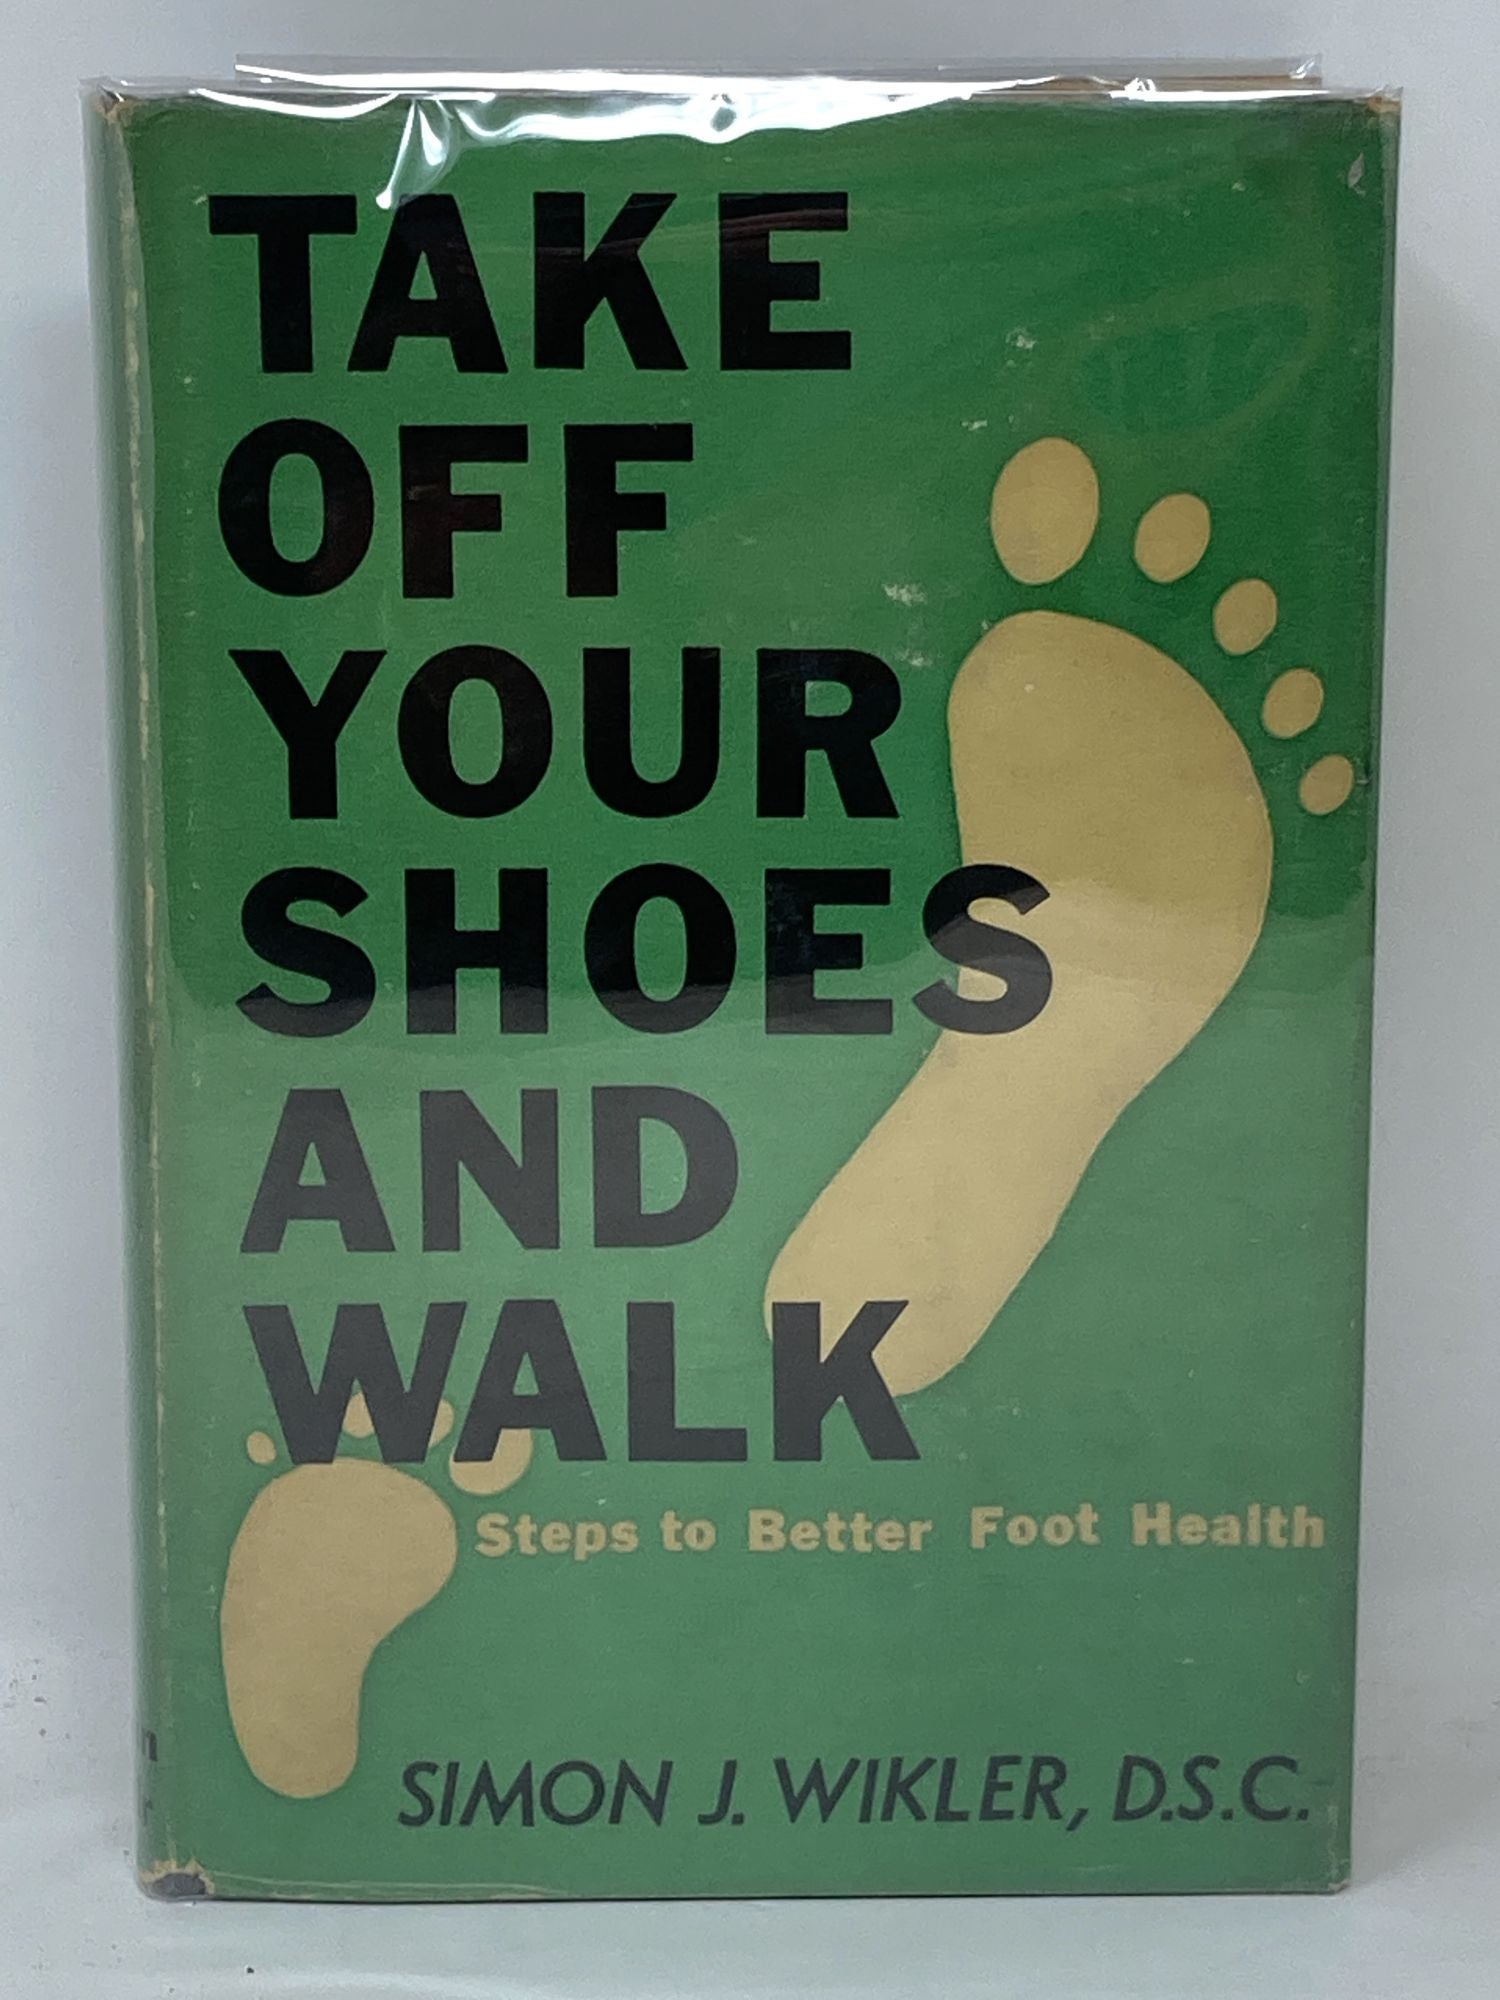 Wikler, Simon J. - Take Off Your Shoes and Walk : Steps to Better Foot Health. (Signed)